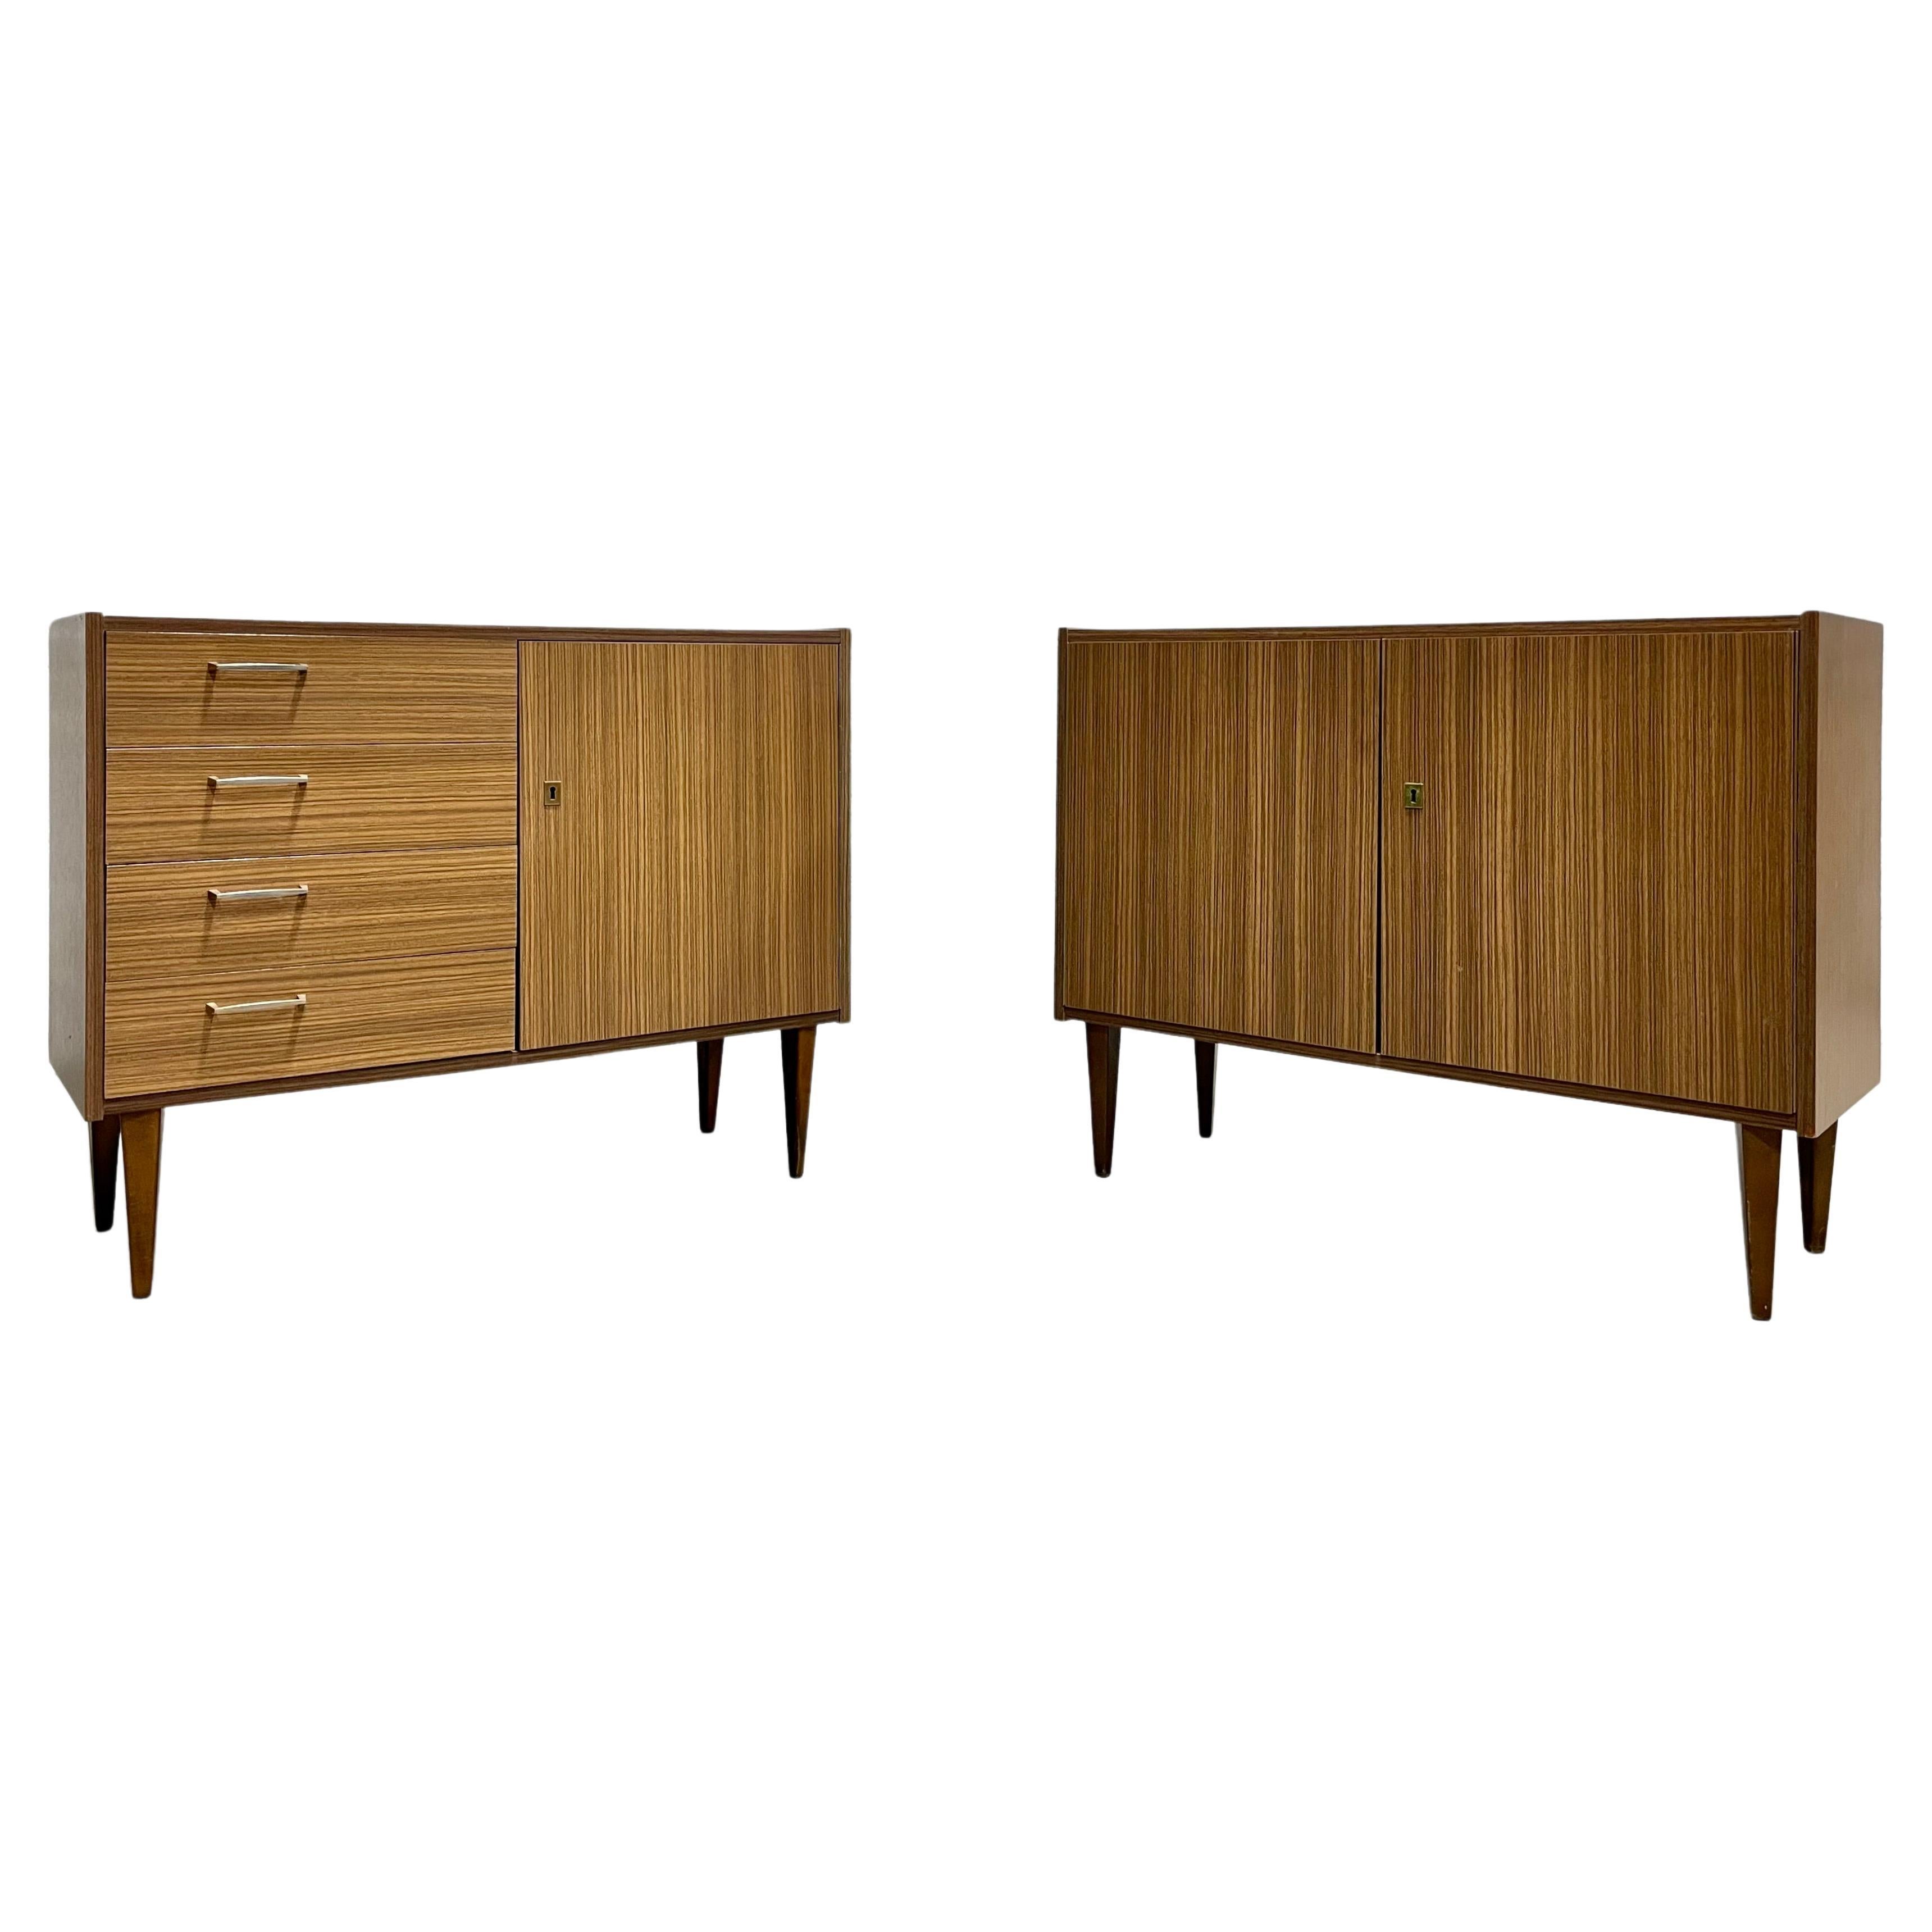 PAIR Mid Century MODERN Laminate CREDENZAS/ Cabinets, Made in Germany, c. 1960's For Sale